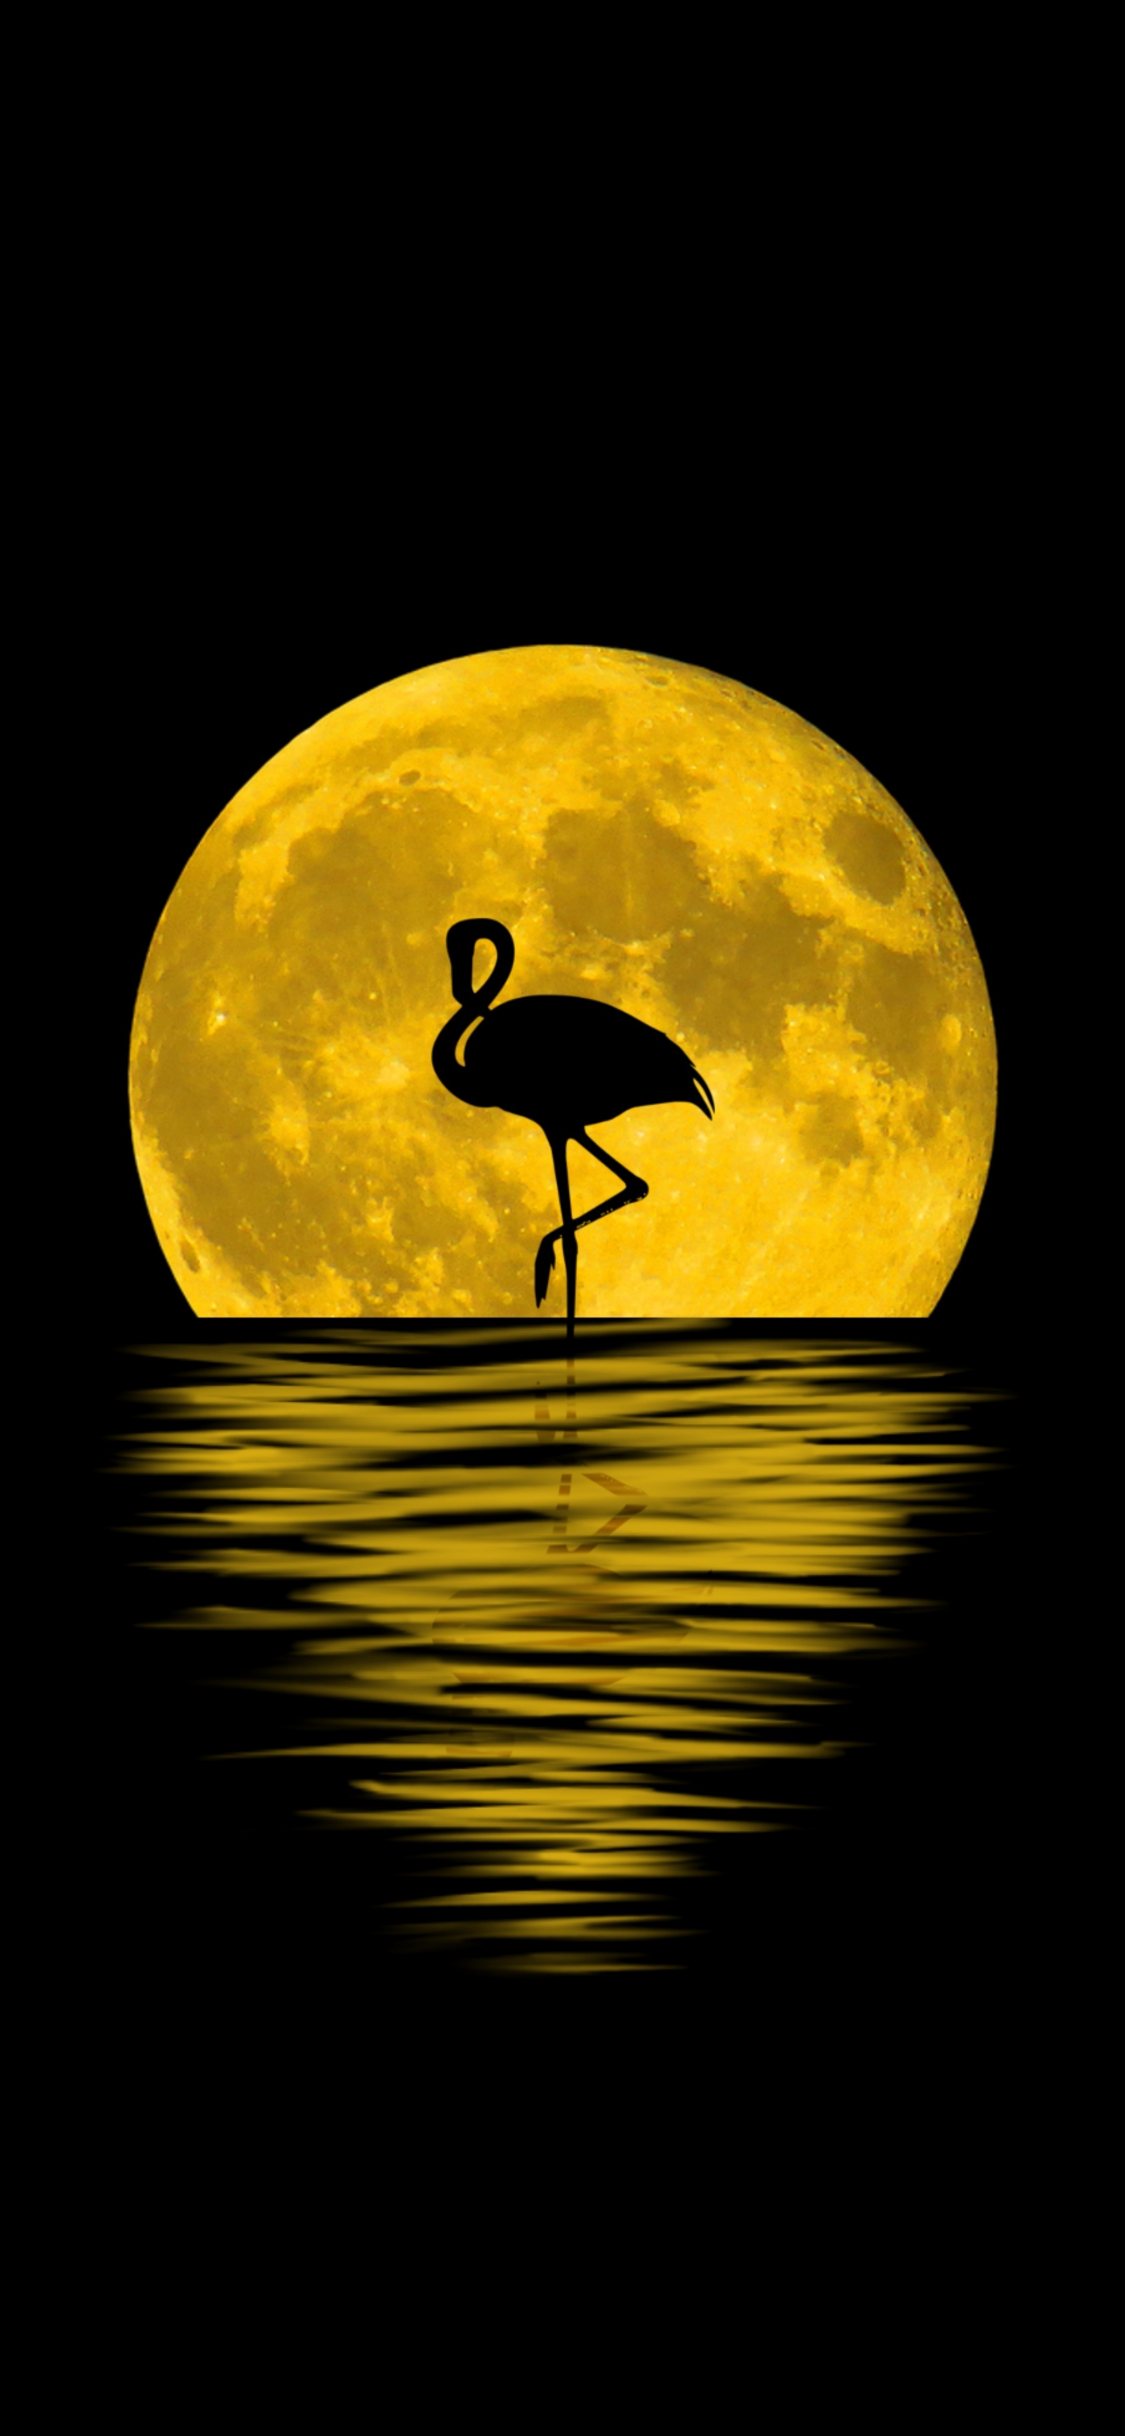 Download flamingo, moon, silhouette, reflections, digital art 1125x2436 wallpaper, iphone x, 1125x2436 HD image, background, 4948